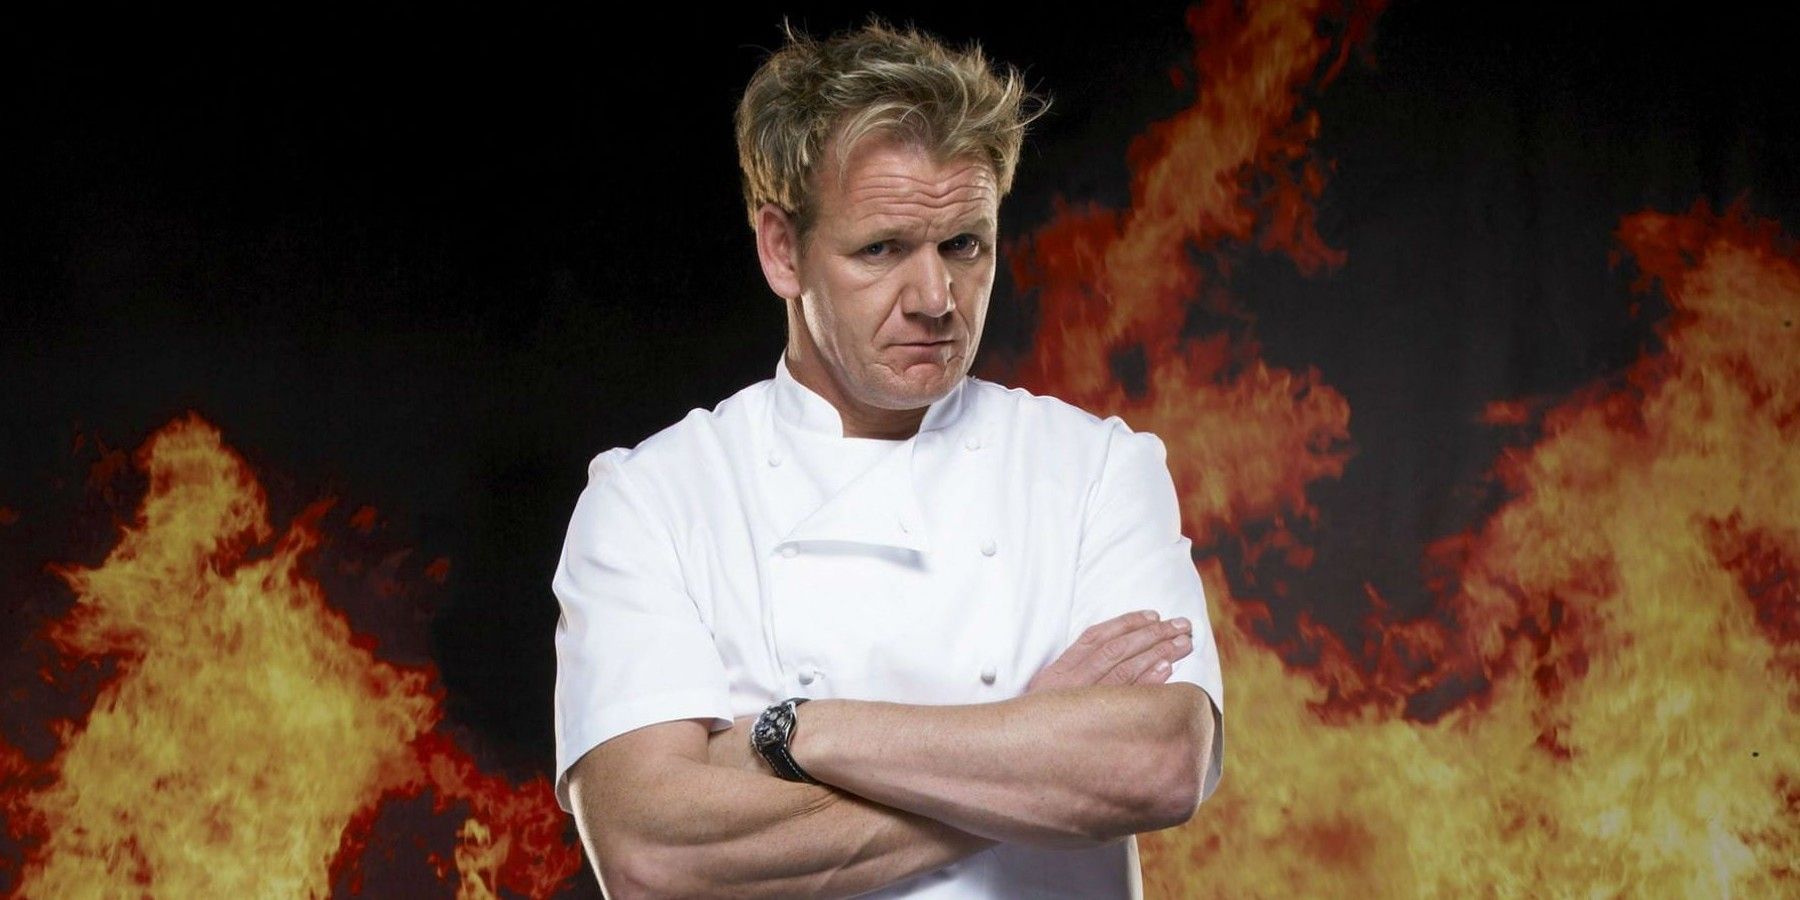 Hell's Kitchen: All The Restaurants Gordon Ramsay Owns (Locations, Names & Worth)